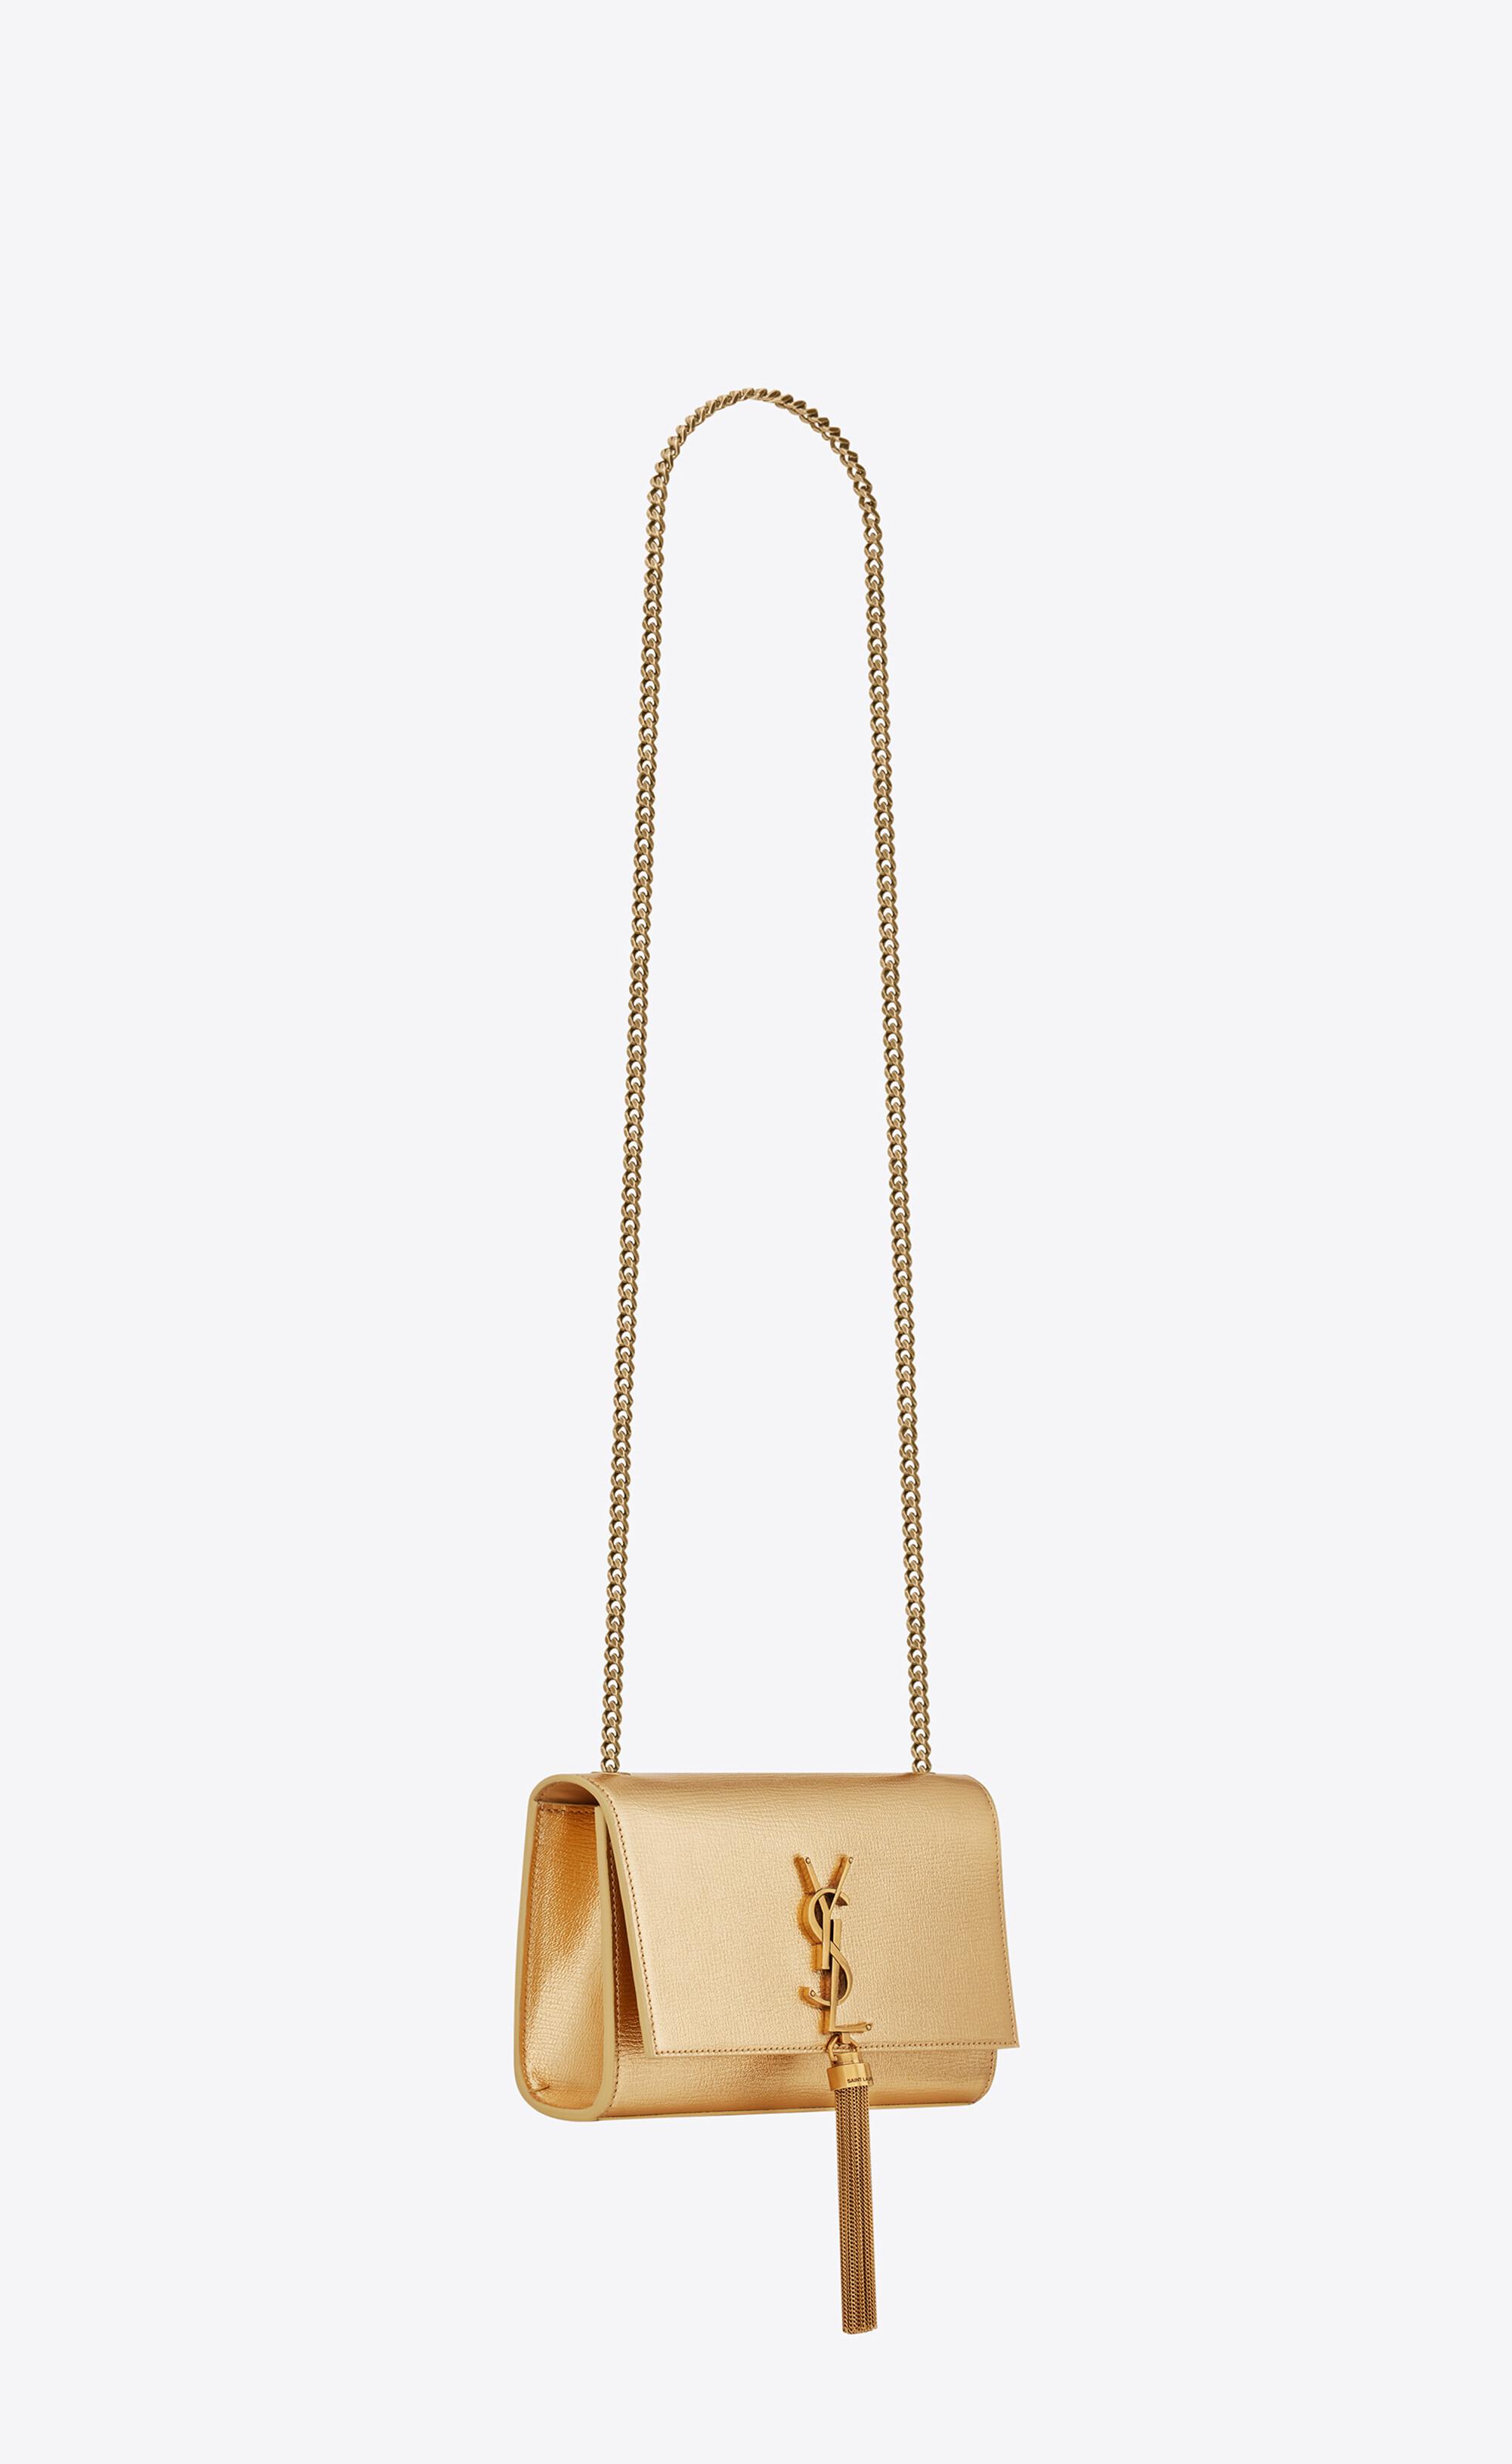 Saint Laurent Kate Small Chain Bag With Tassel In Shiny Grained Leather in  Metallic | Lyst